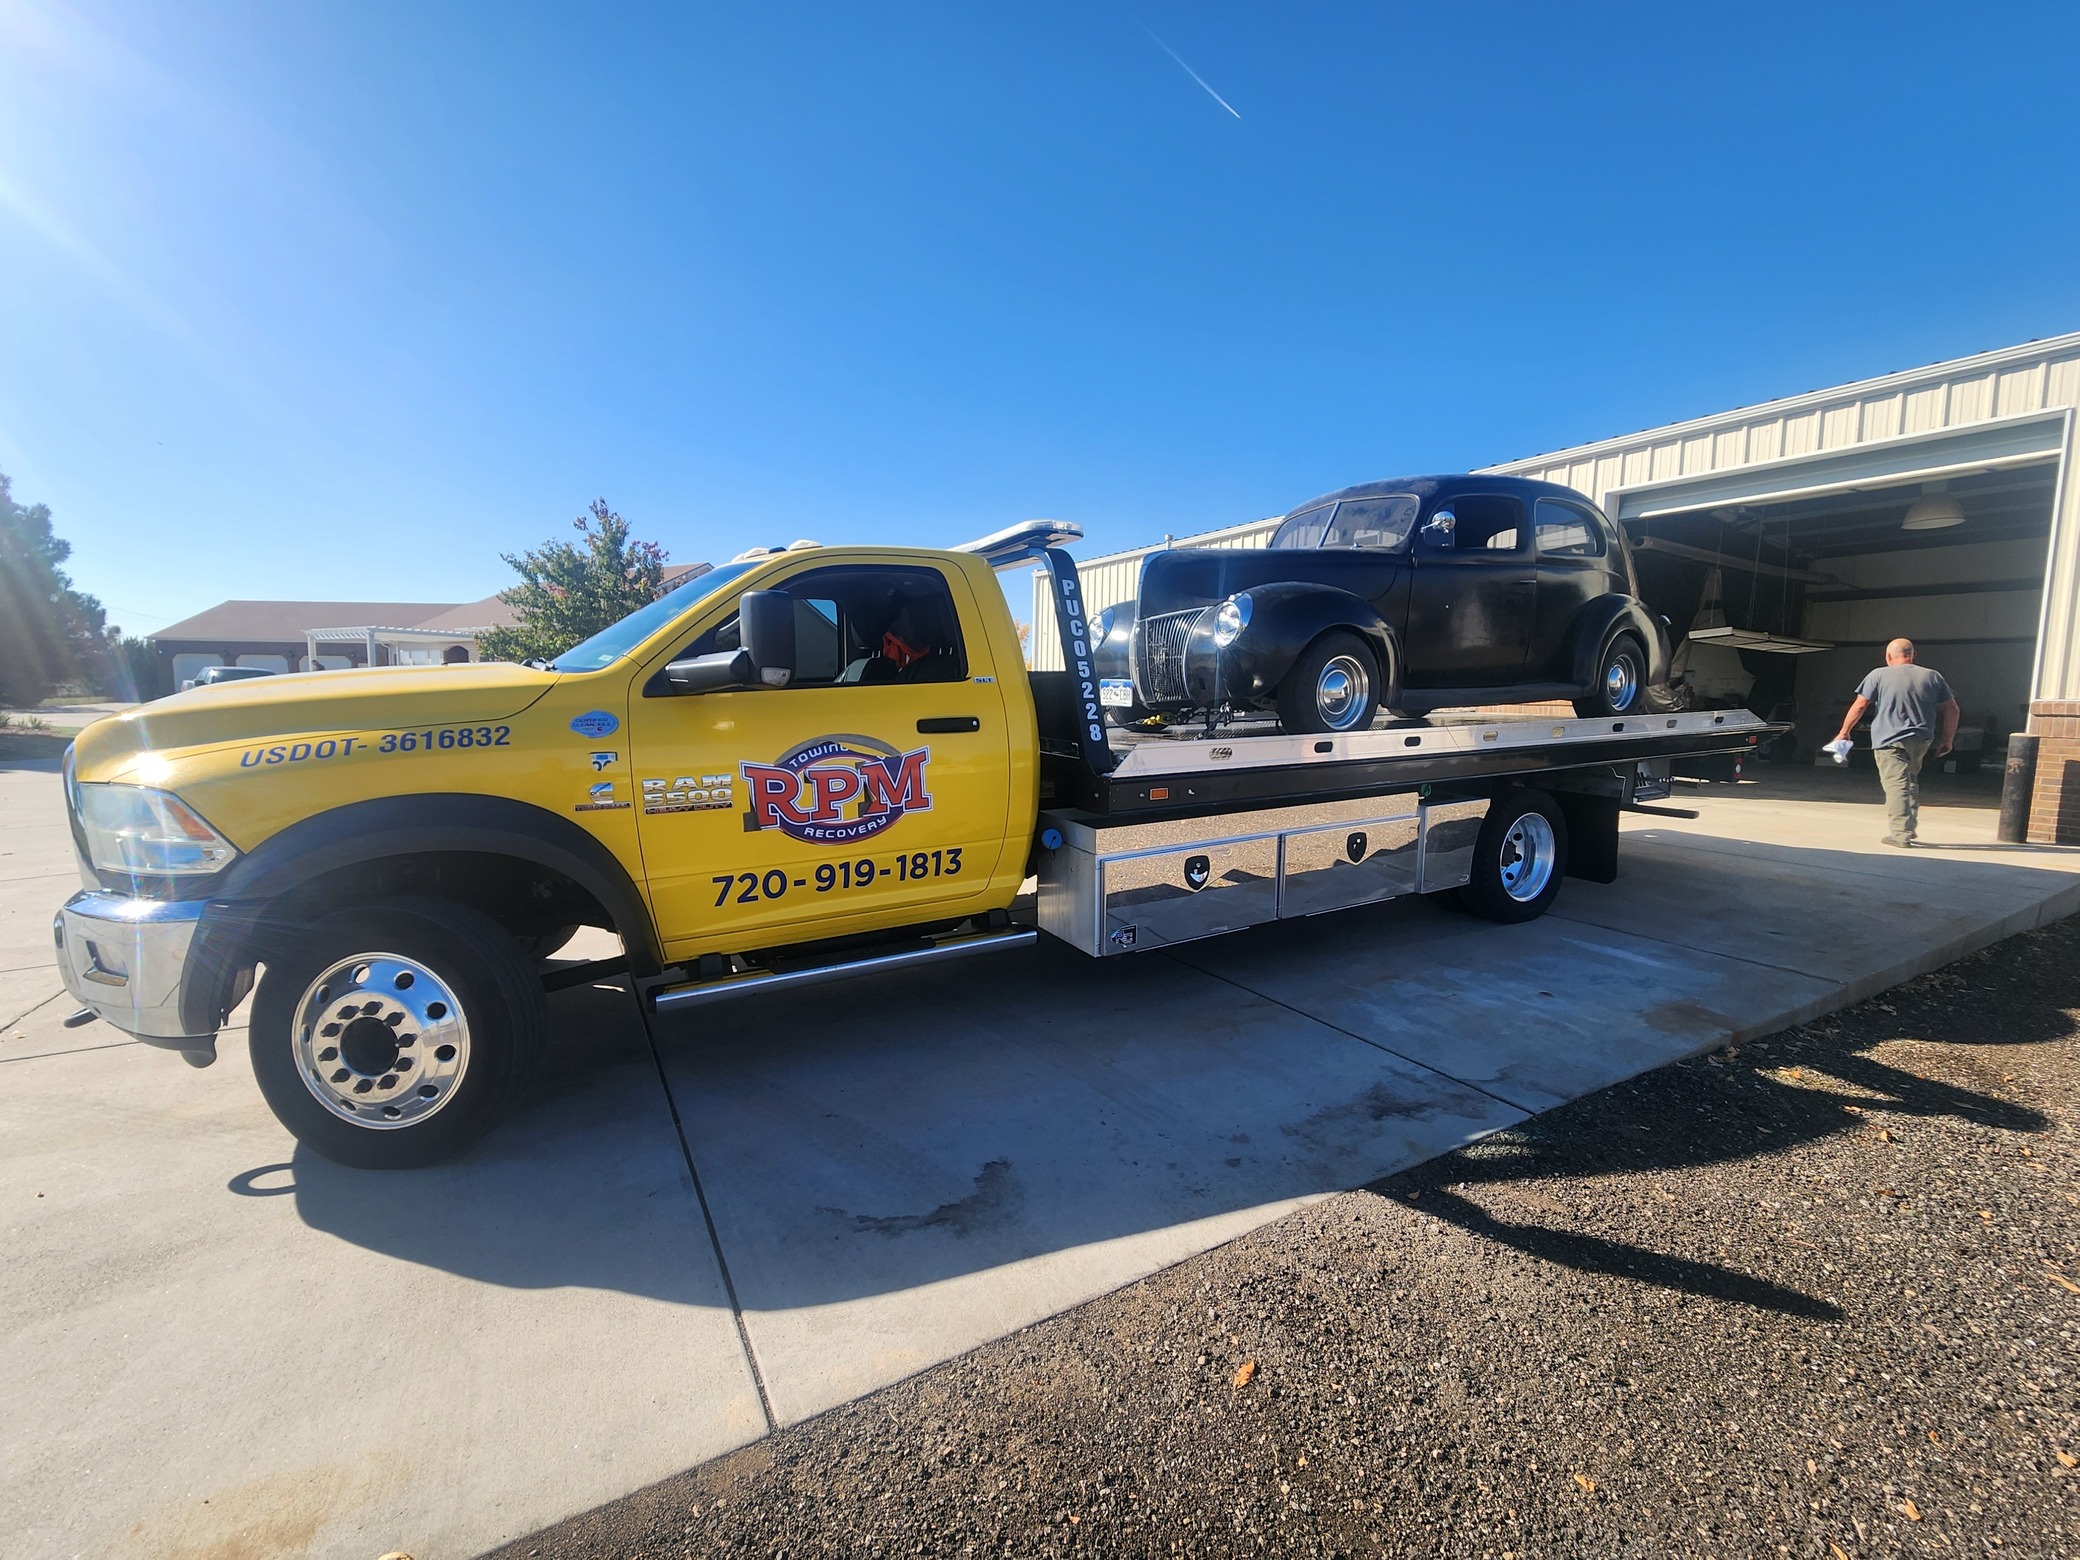 this image shows towing service in Aurora, CO